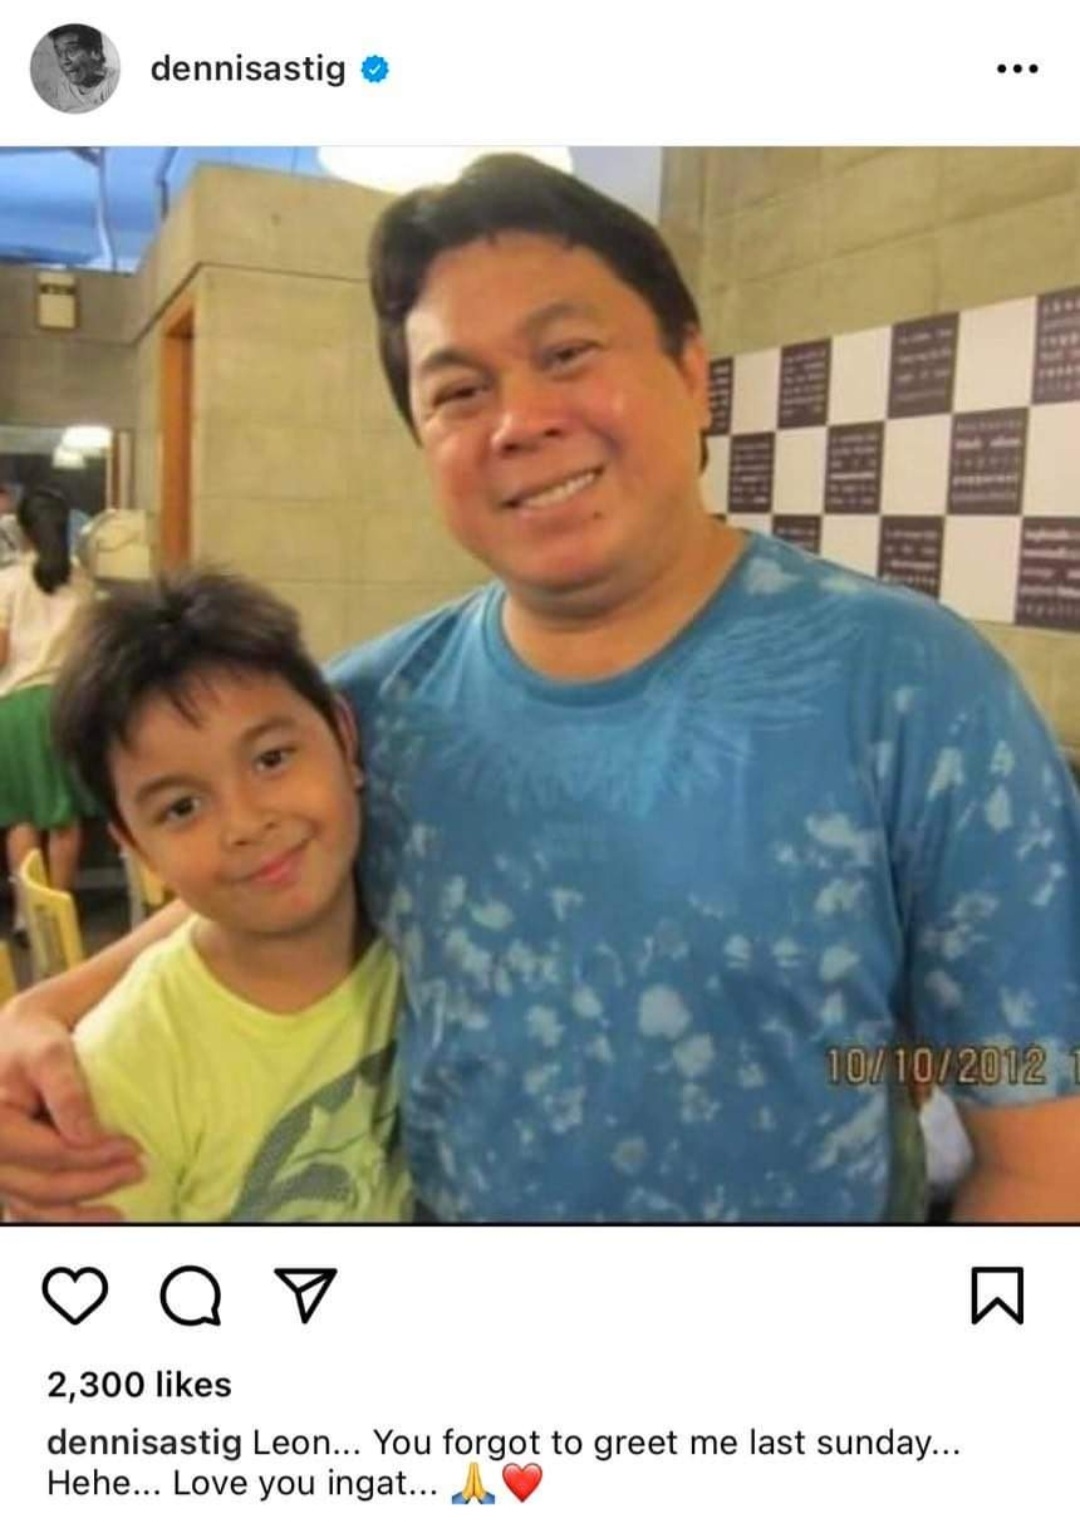 Dennis Padilla Father's Day message